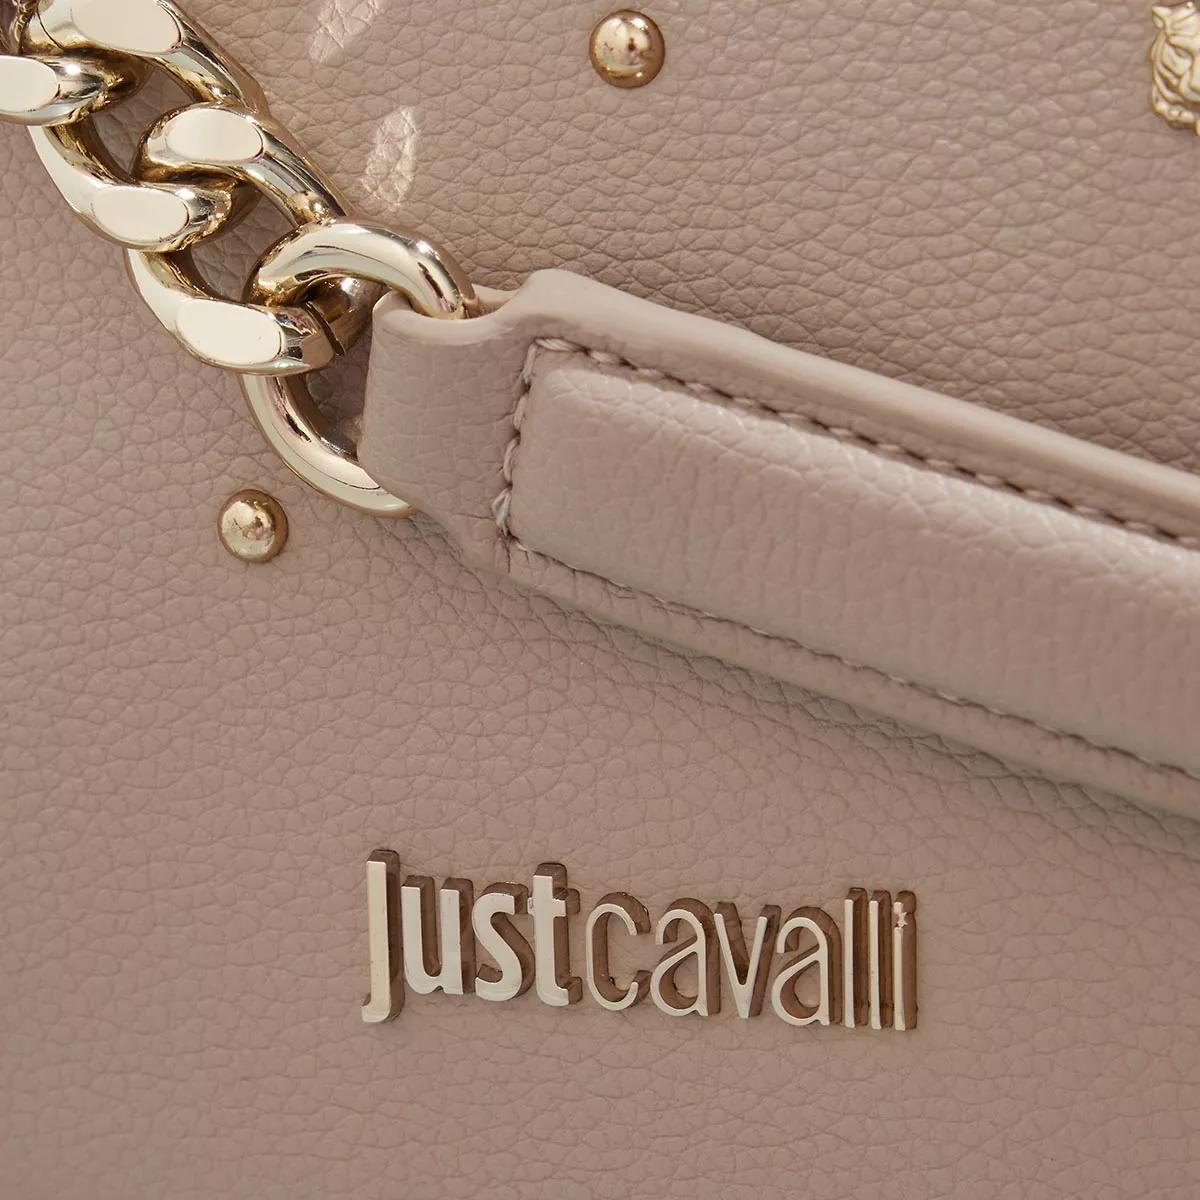 Just Cavalli Crossbody bags Range R Tiger Studs Sketch 2 Bags in taupe